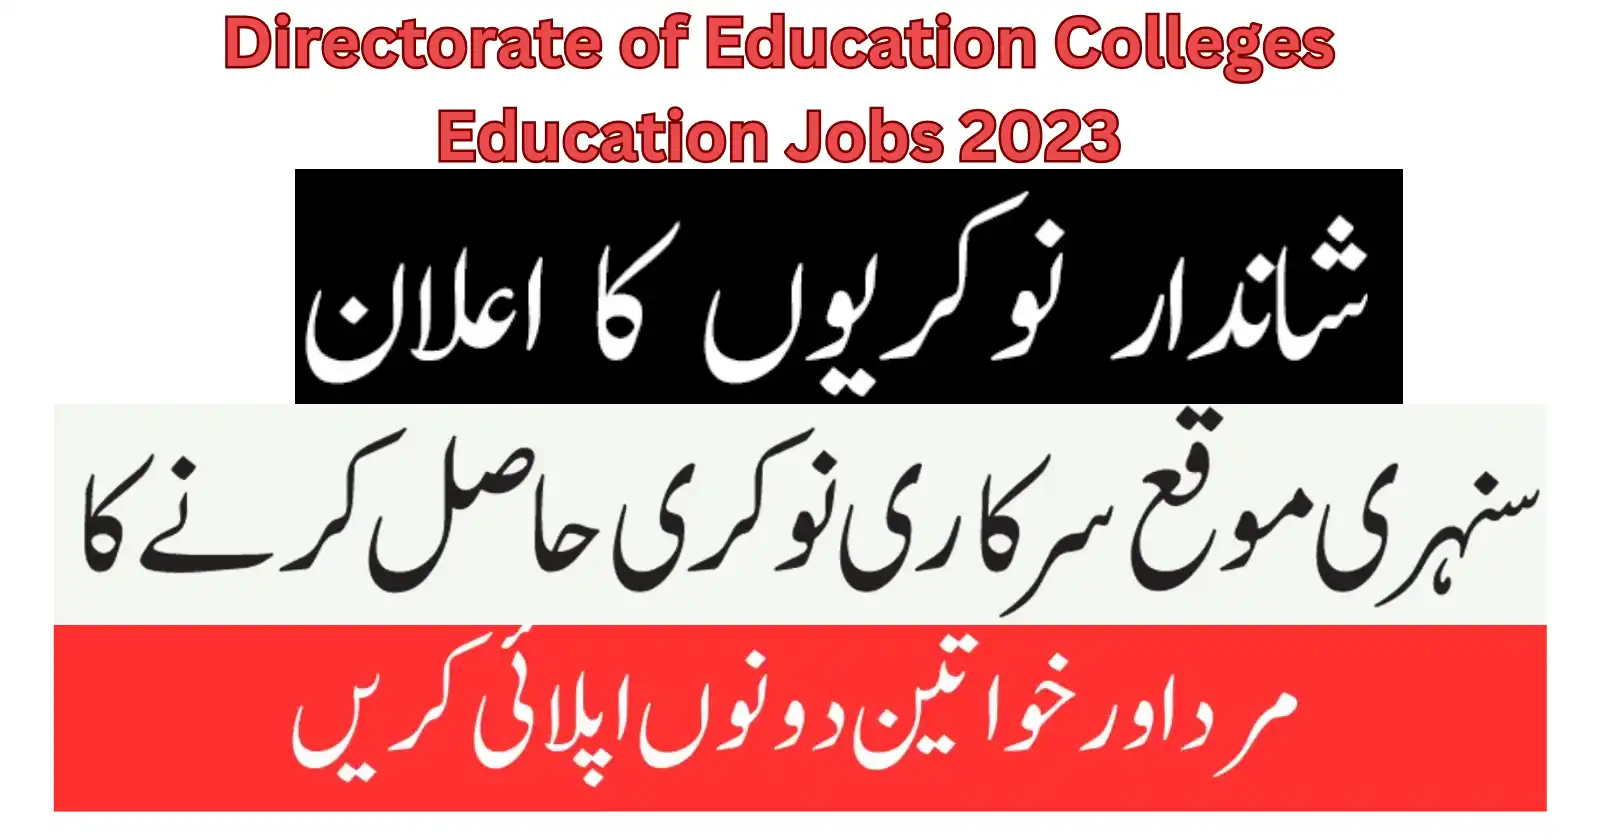 Directorate of Education Colleges Education Jobs 2023